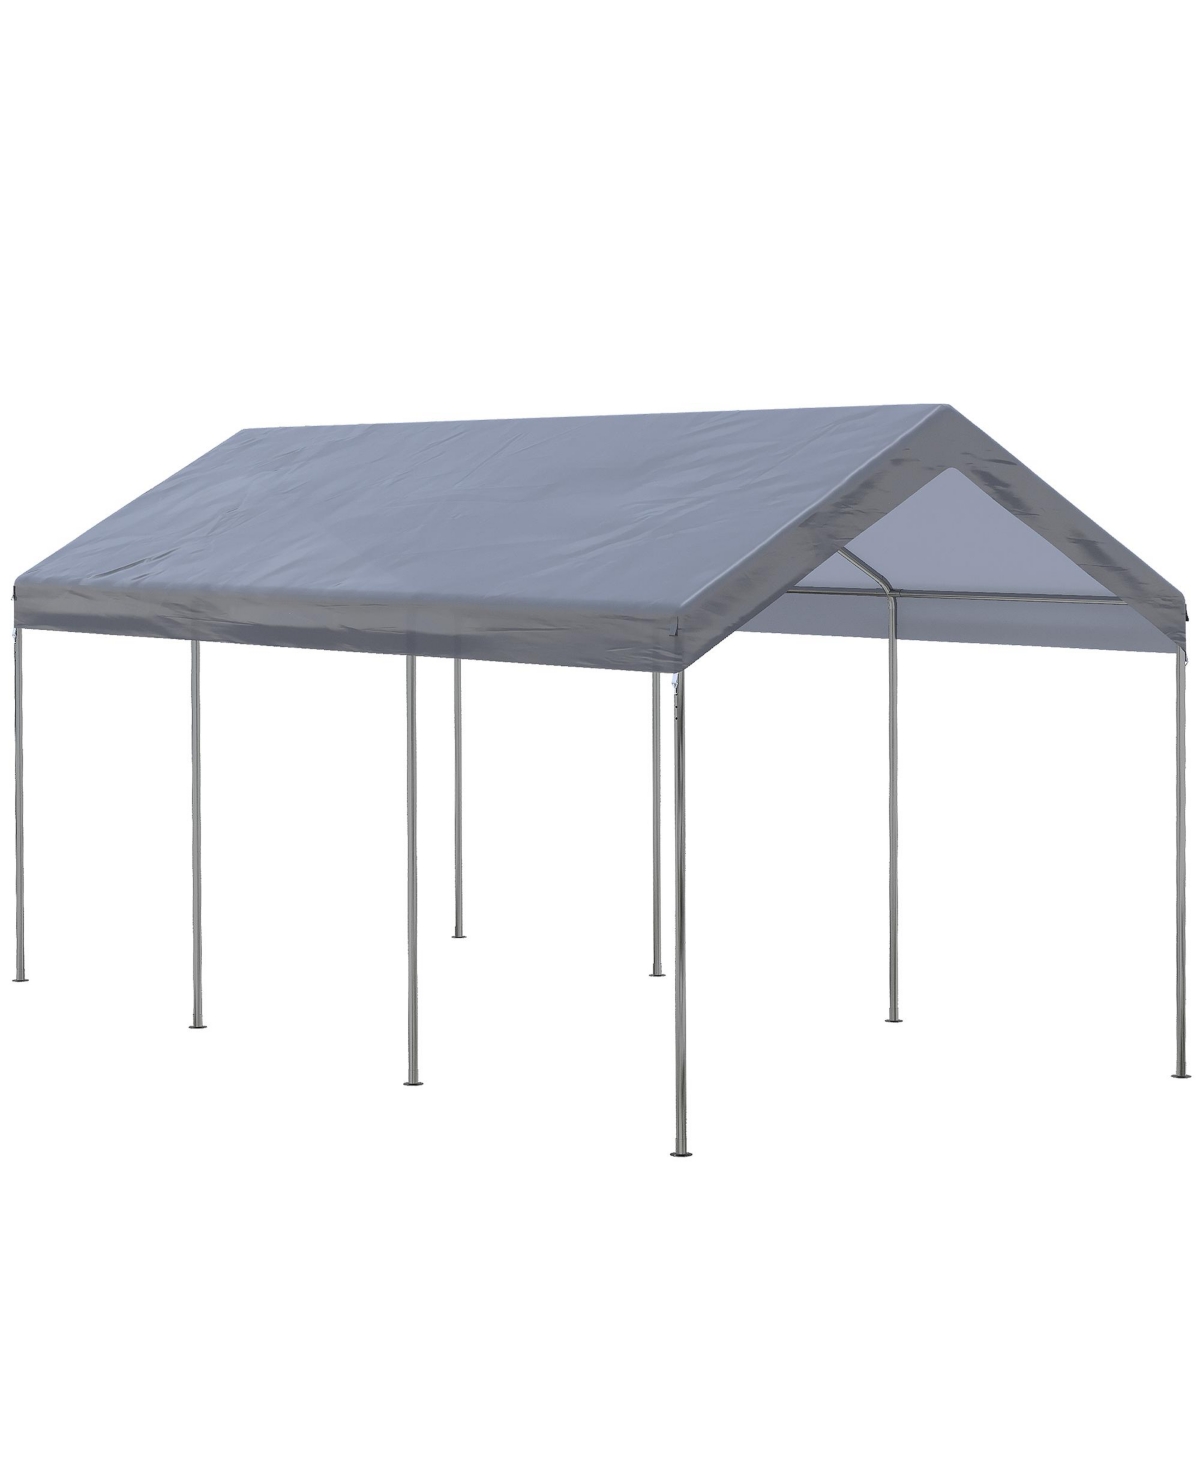 10' x 20' Carport, Portable Garage & Patio Canopy Tent Storage Shelter, Adjustable Height, Anti-uv Cover for Car, Truck, Boat, Catering, Wedd